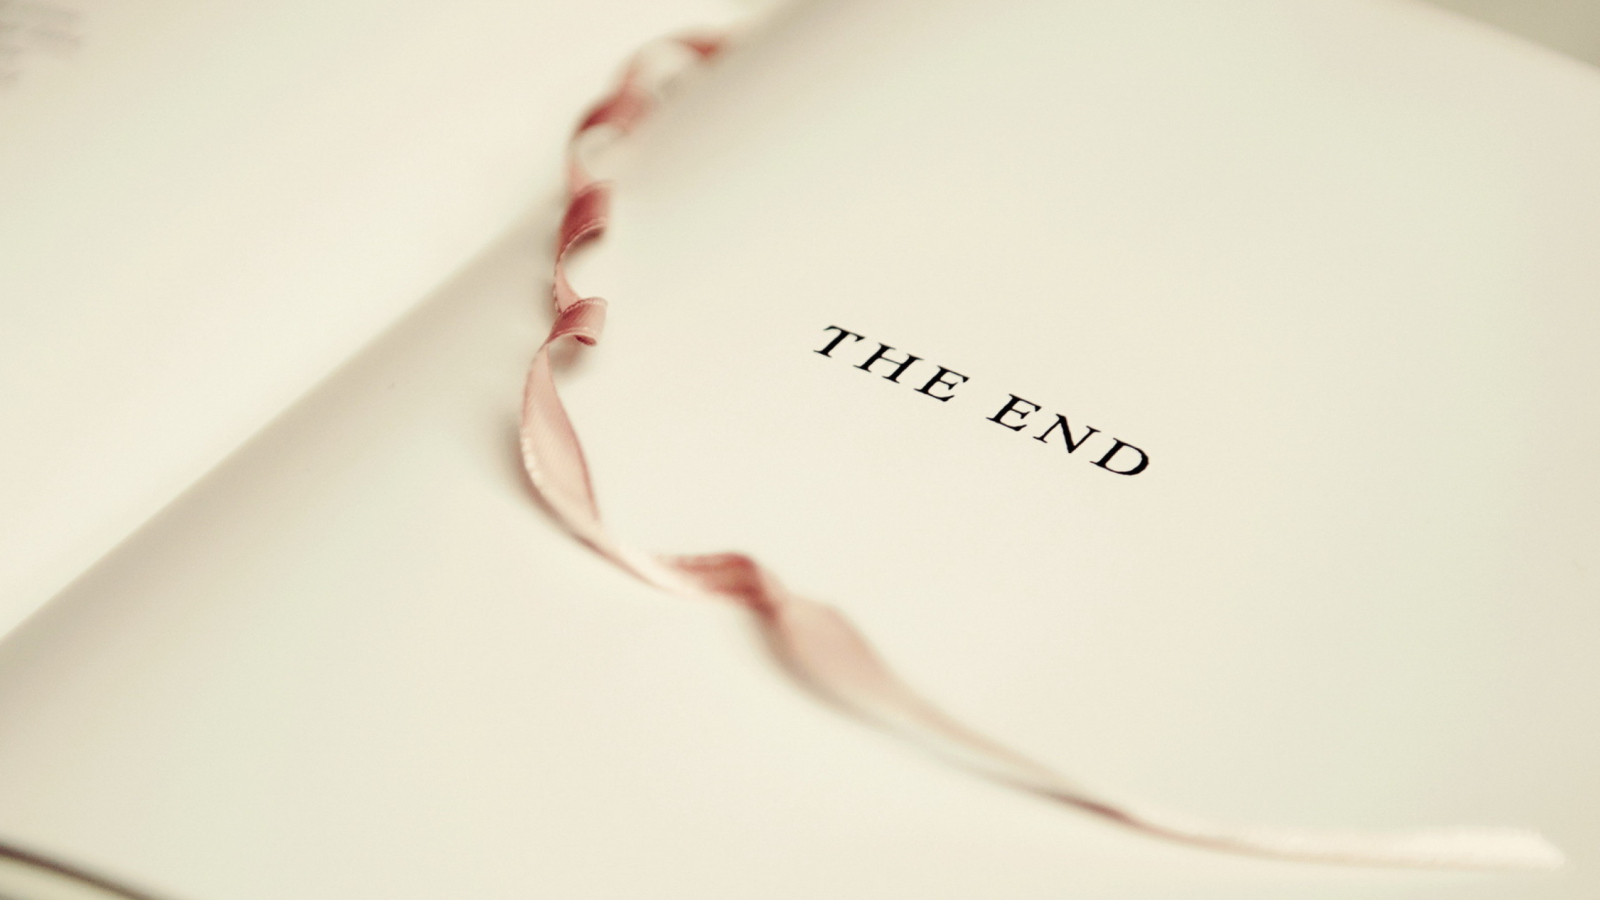 The End wallpaper 1600x900